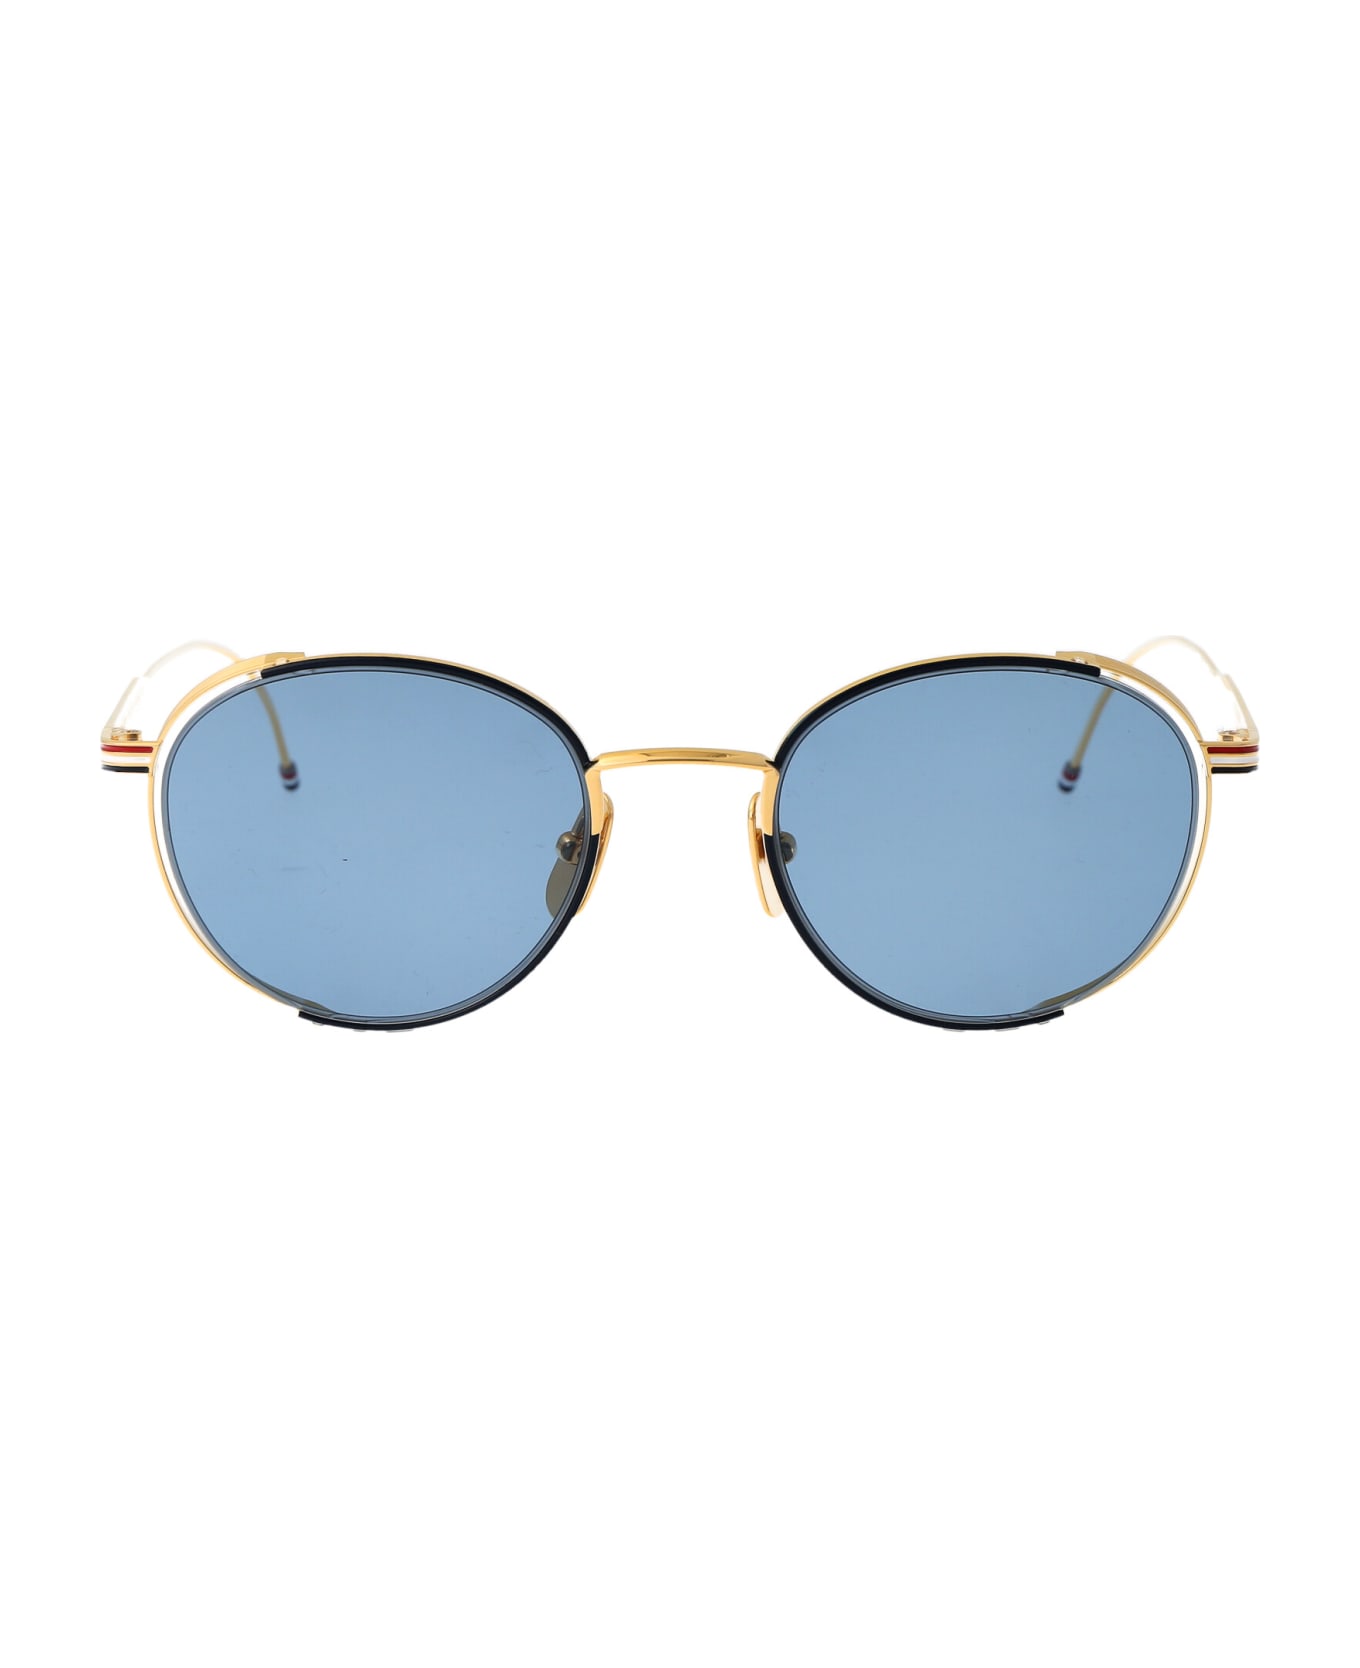 Thom Browne Ues106a-g0001-415-50 Sunglasses - 415 NAVY